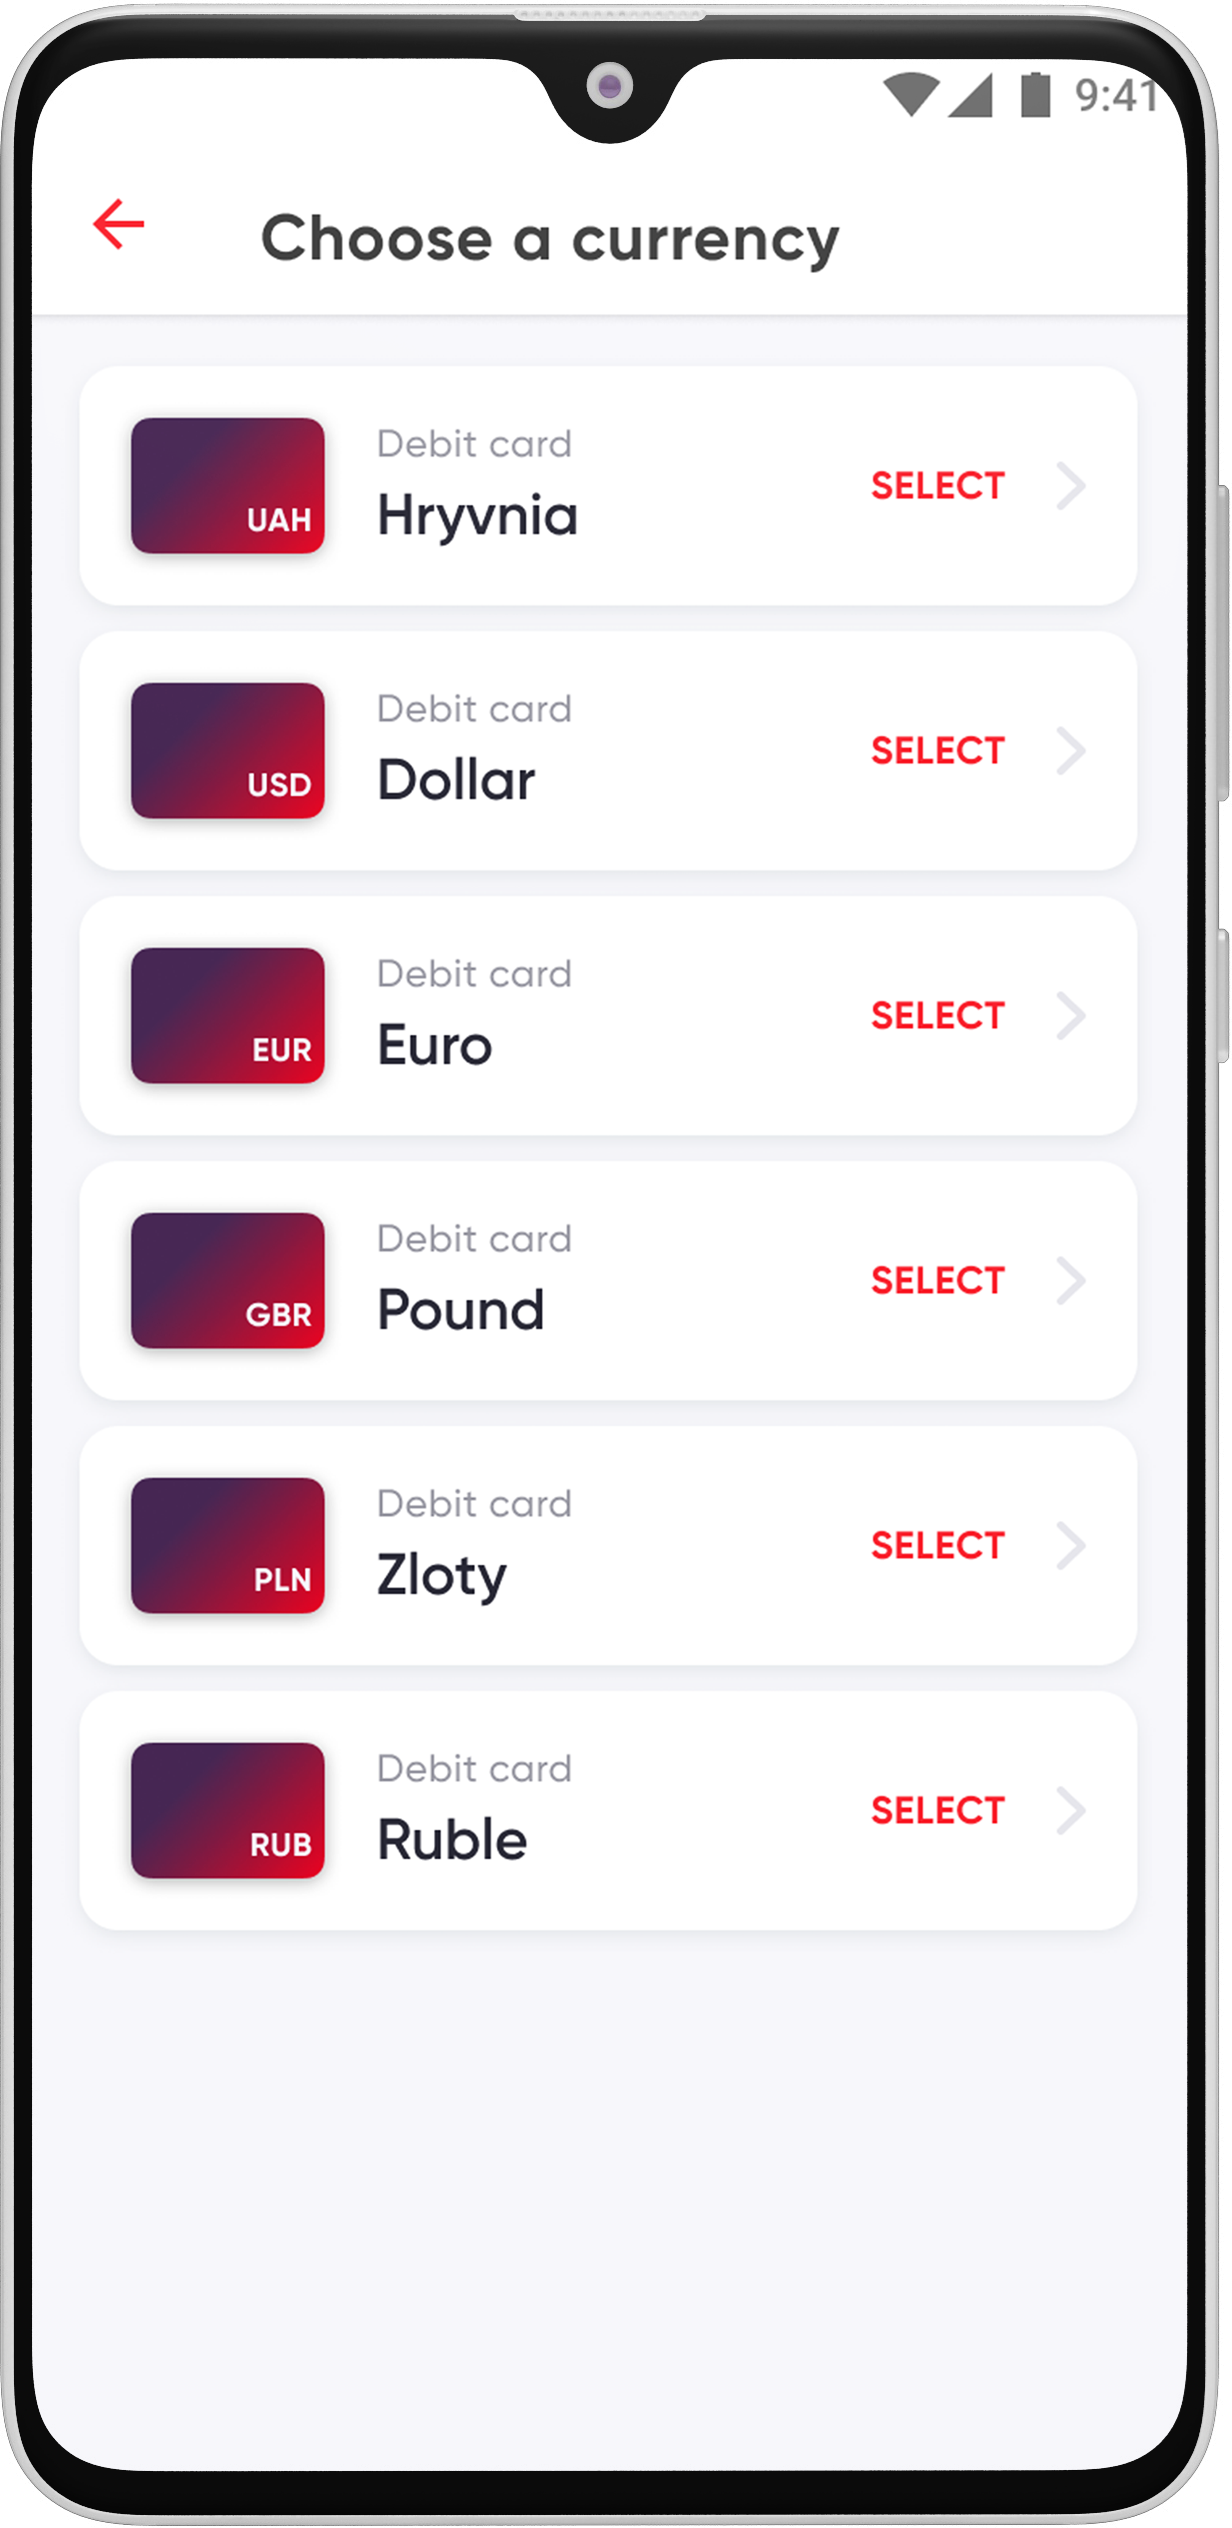 To open a deposit, you need a debit card, so select the currency of the card and click "Continue" 